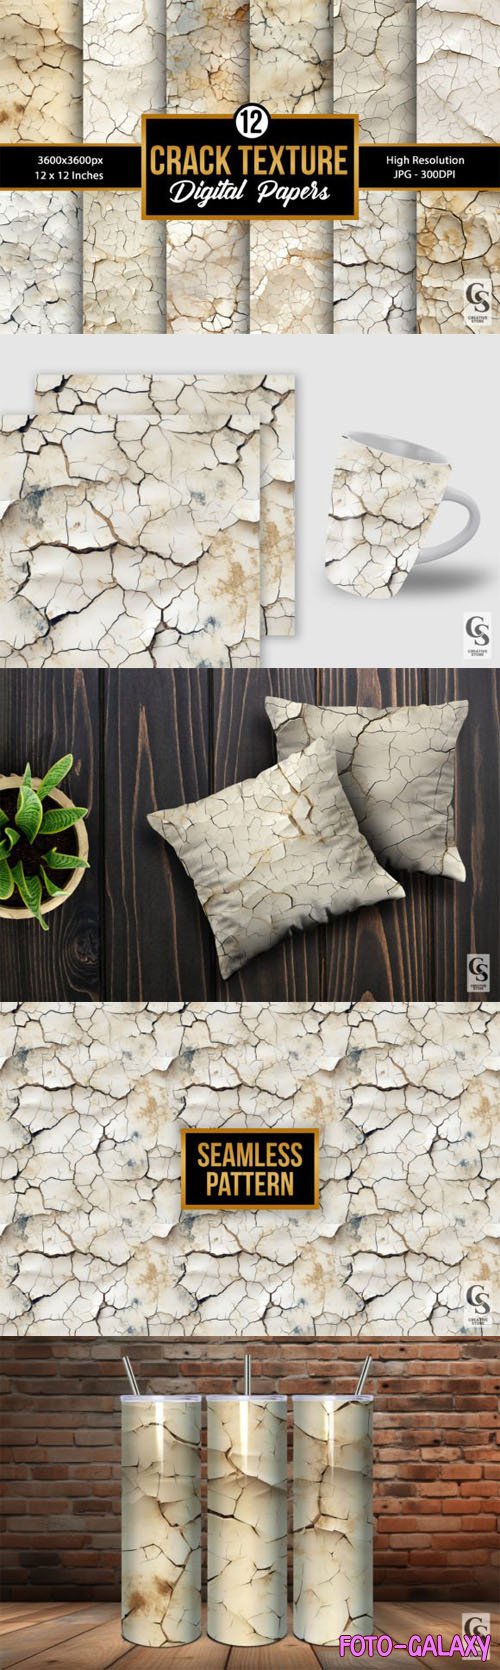 12 Cracked Textures Backgrounds Pack